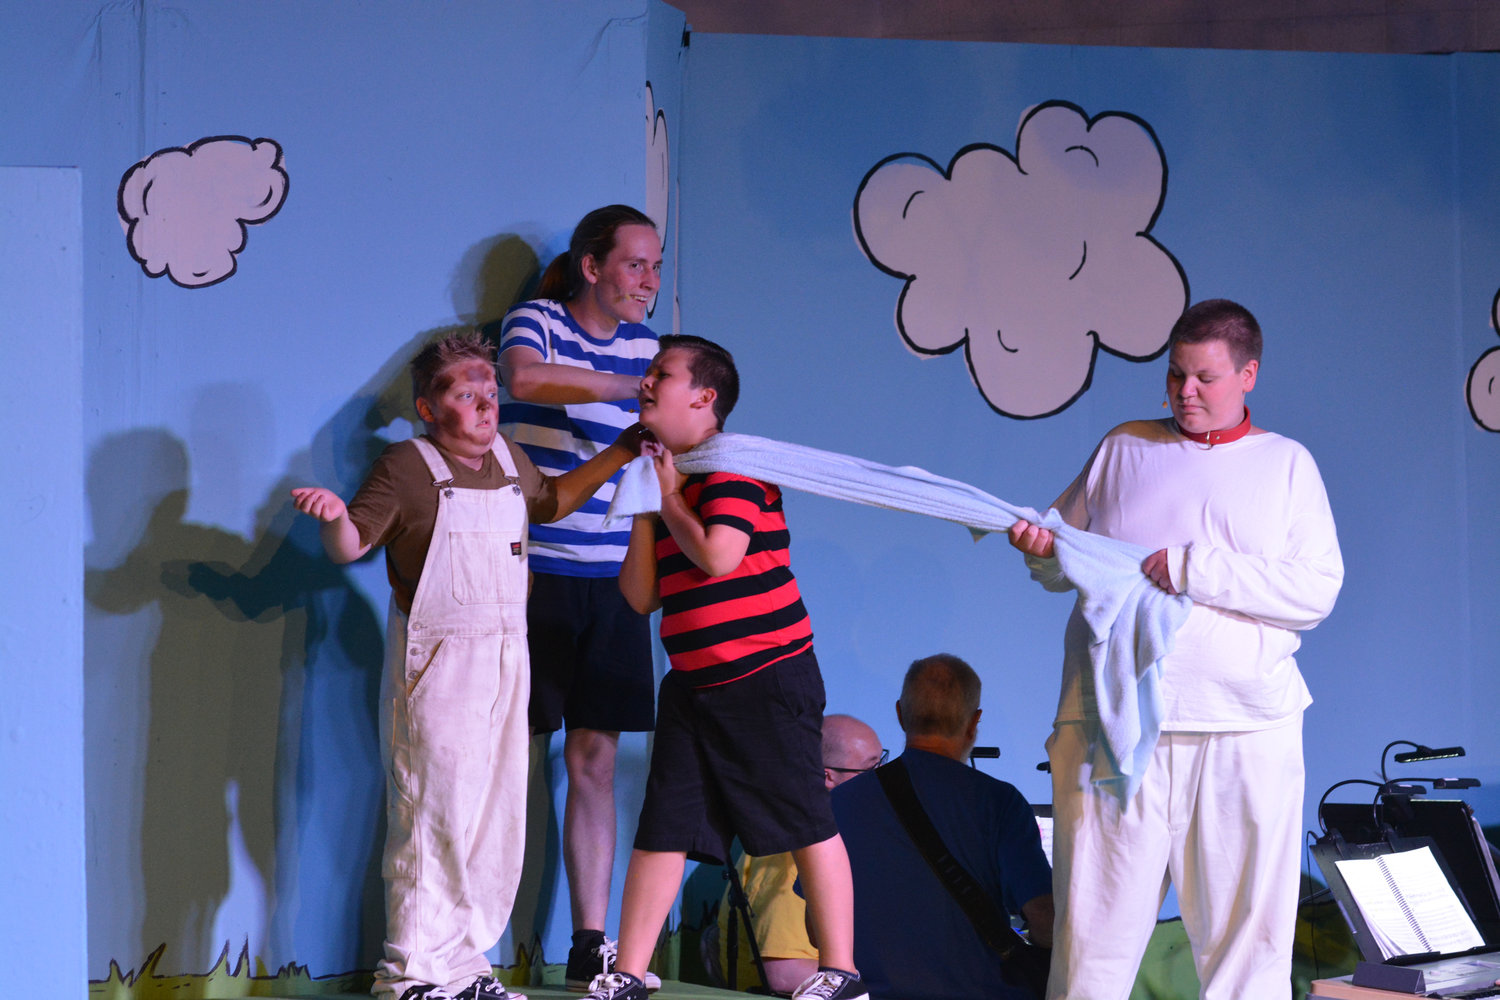 Snoopy, Linus, Schroeder and Pig-Pen argue over Linus’ blanket during a performance by Tenino Young-at-Heart Theatre on Thursday, July 28.